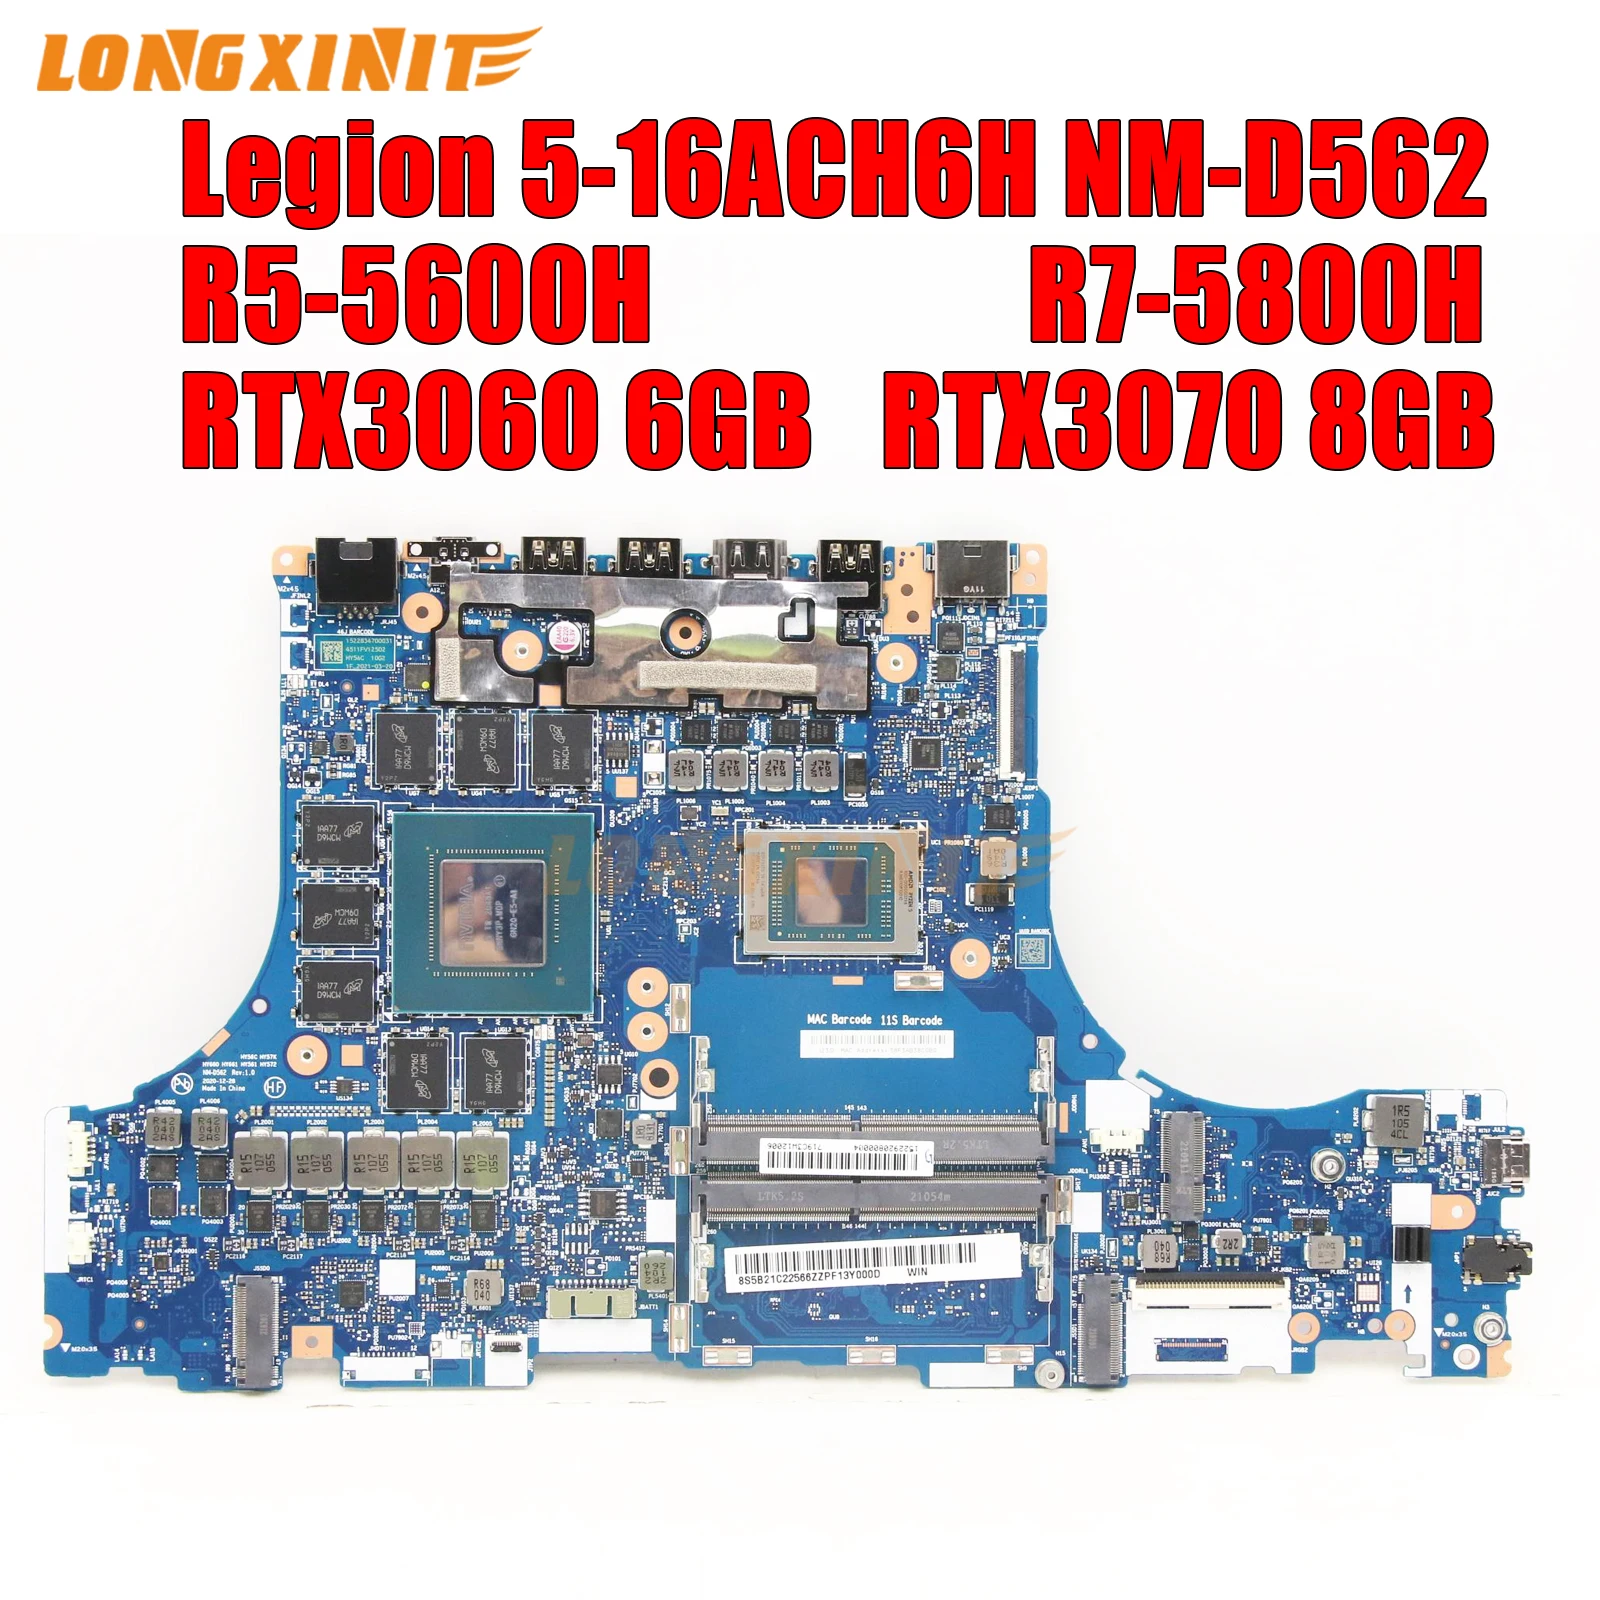 

NM-D562 For Lenovo Legion 5 Pro-16ACH6H Laptop motherboard with CPU R5-5600H R7-5800H GPU RTX3060-6G RTX3070 8G TEST 100% OK